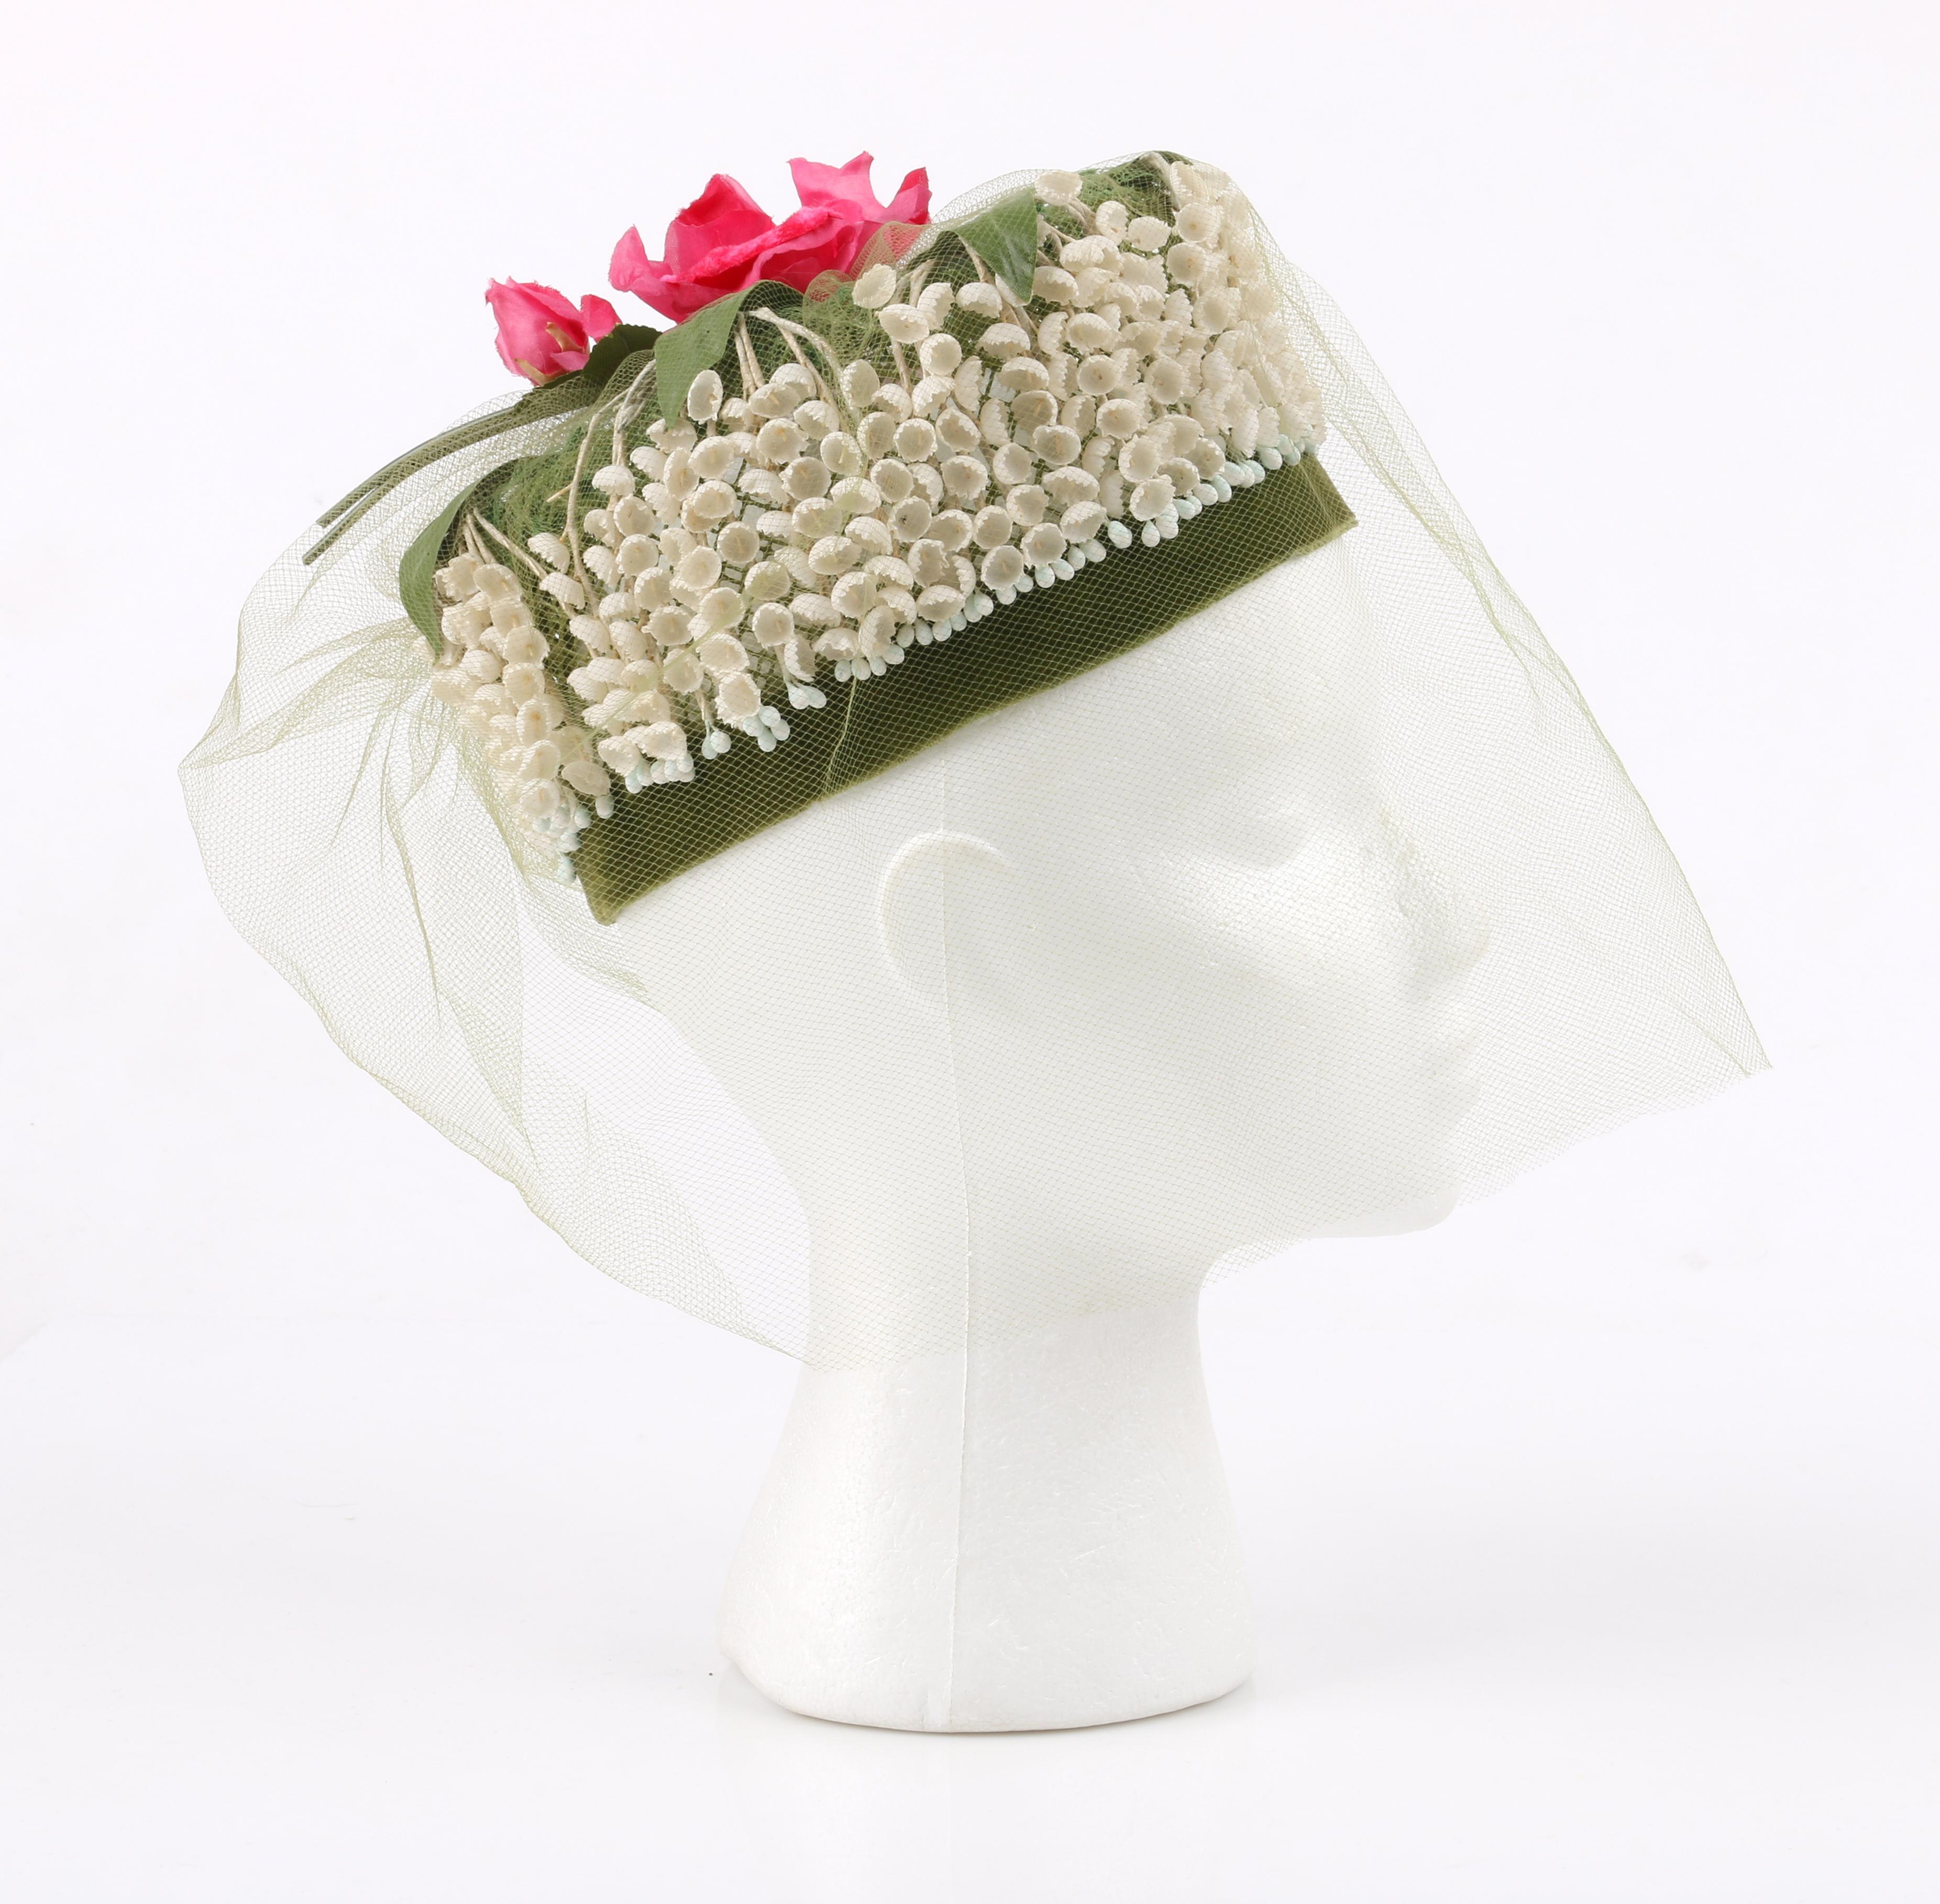 Women's MISS FEIGE c.1960's Lily of the Valley Veiled Floral Garden Party Pillbox Hat